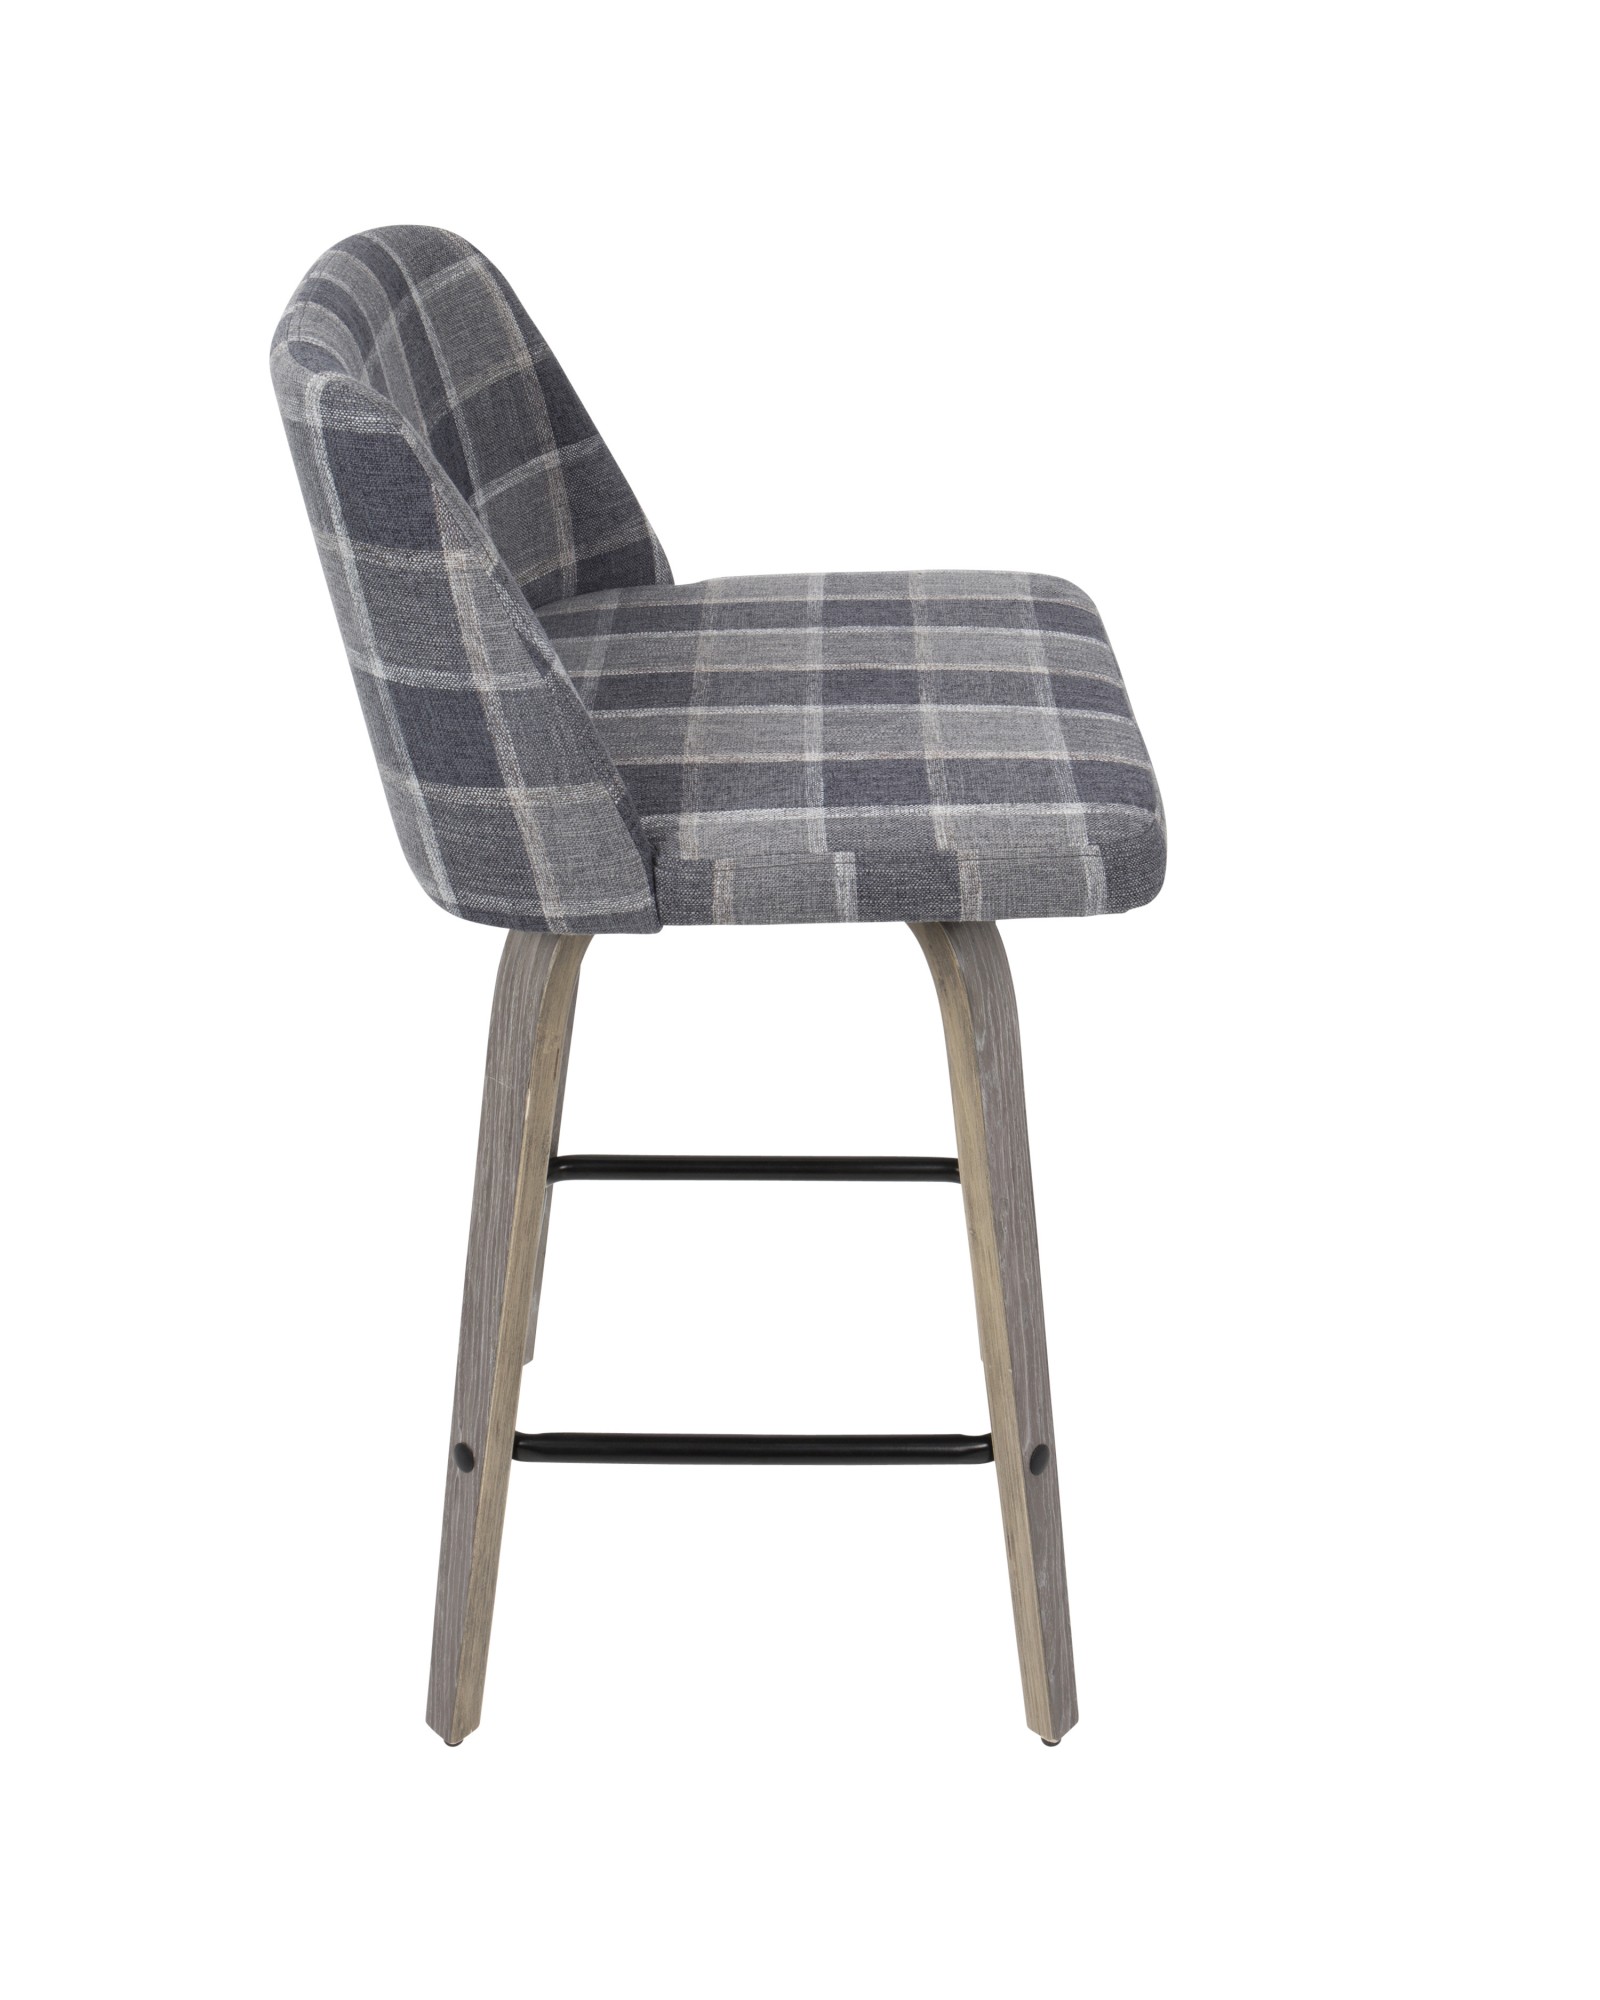 Toriano Mid-Century Modern Counter Stool in Light Grey Wood and Blue Plaid